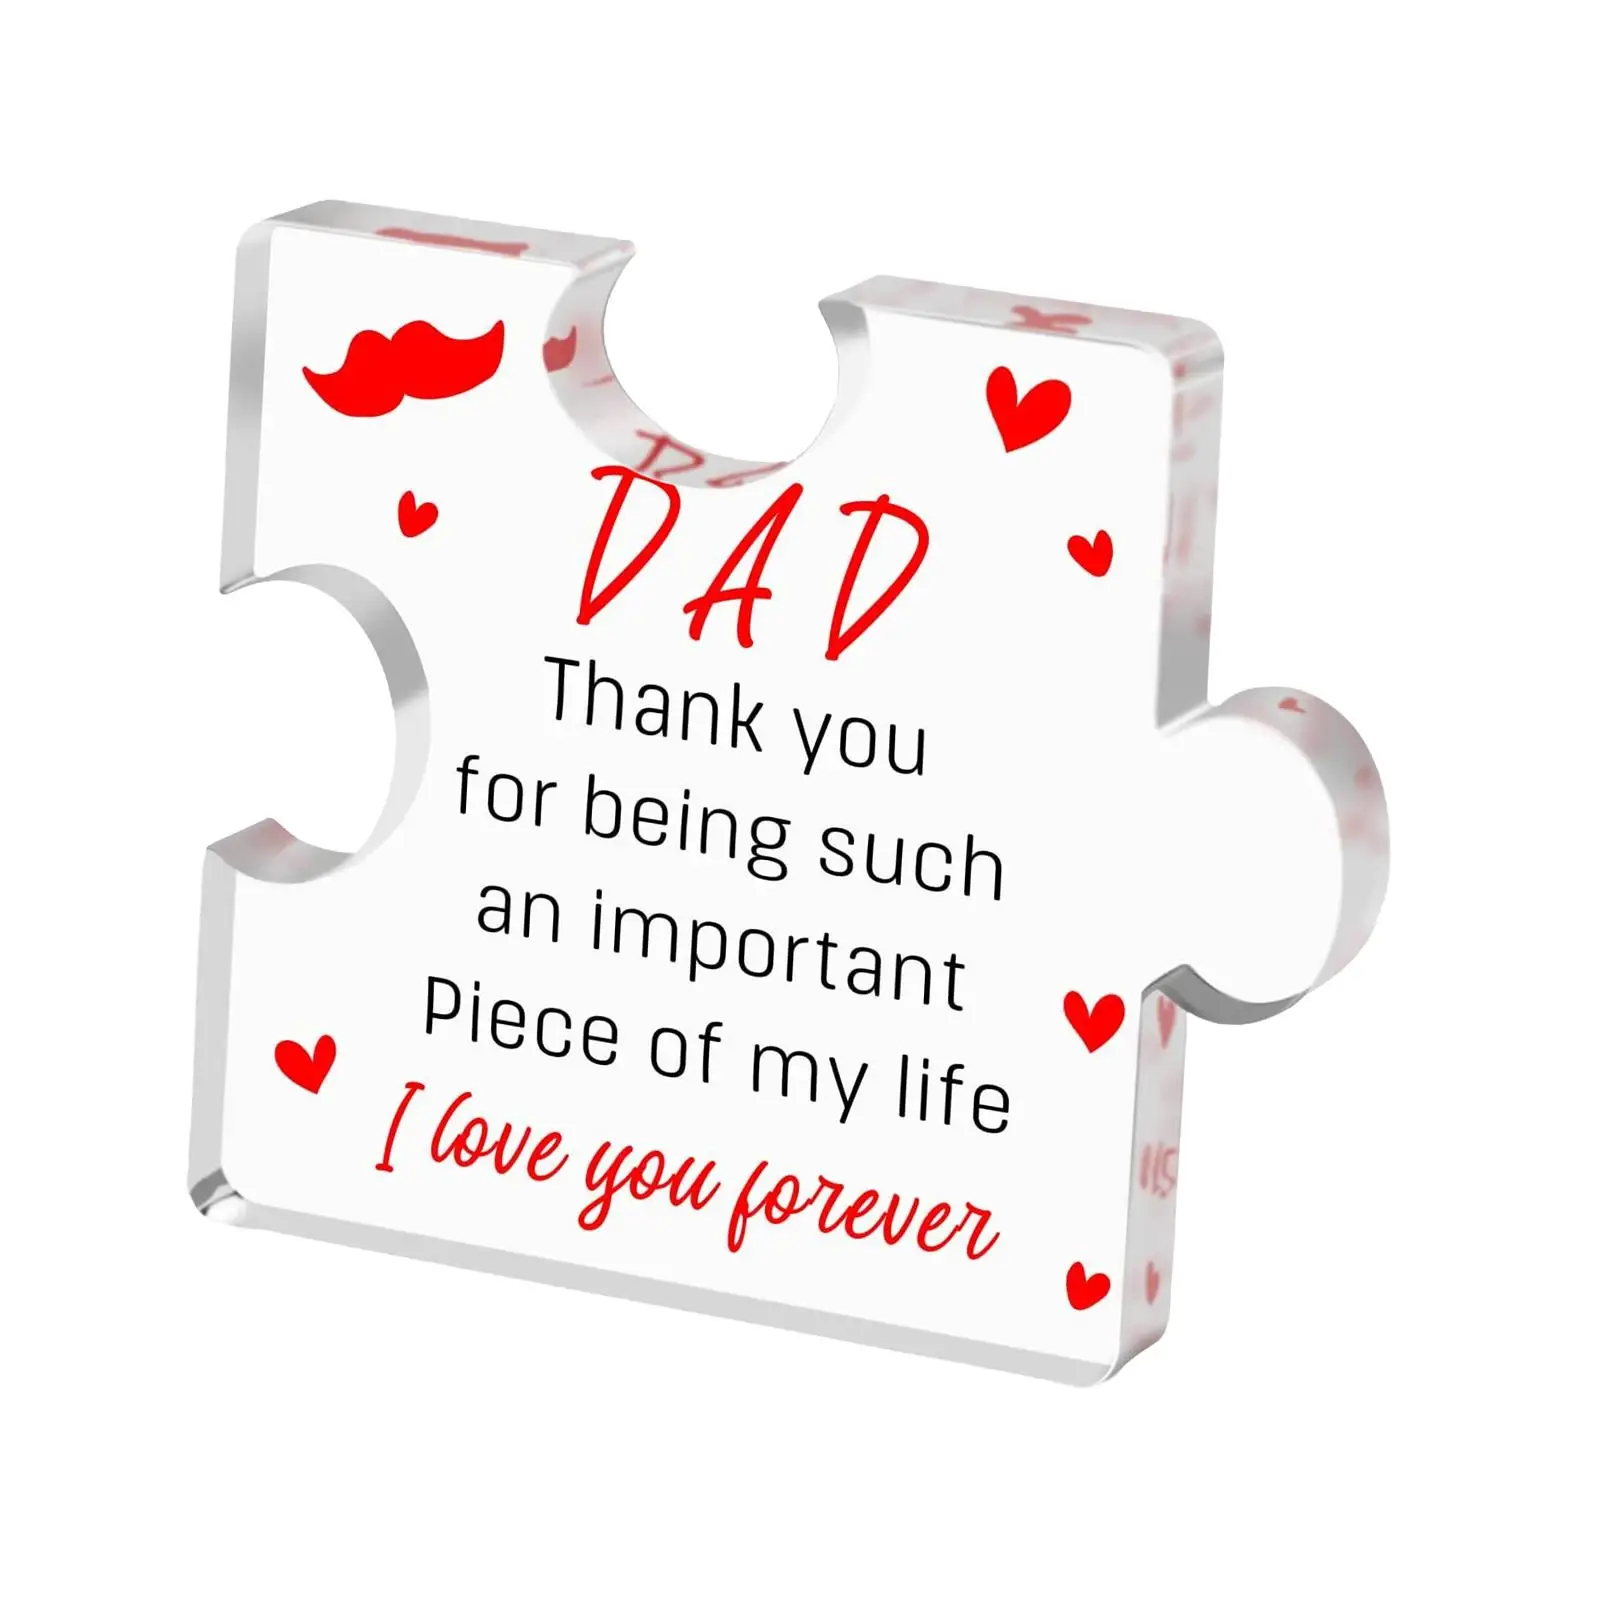 Acrylic Block Puzzle Thank You Gift Heartwarming Desk Decorations My Man Gifts Fathers Day Present Birthday Gifts from Kids